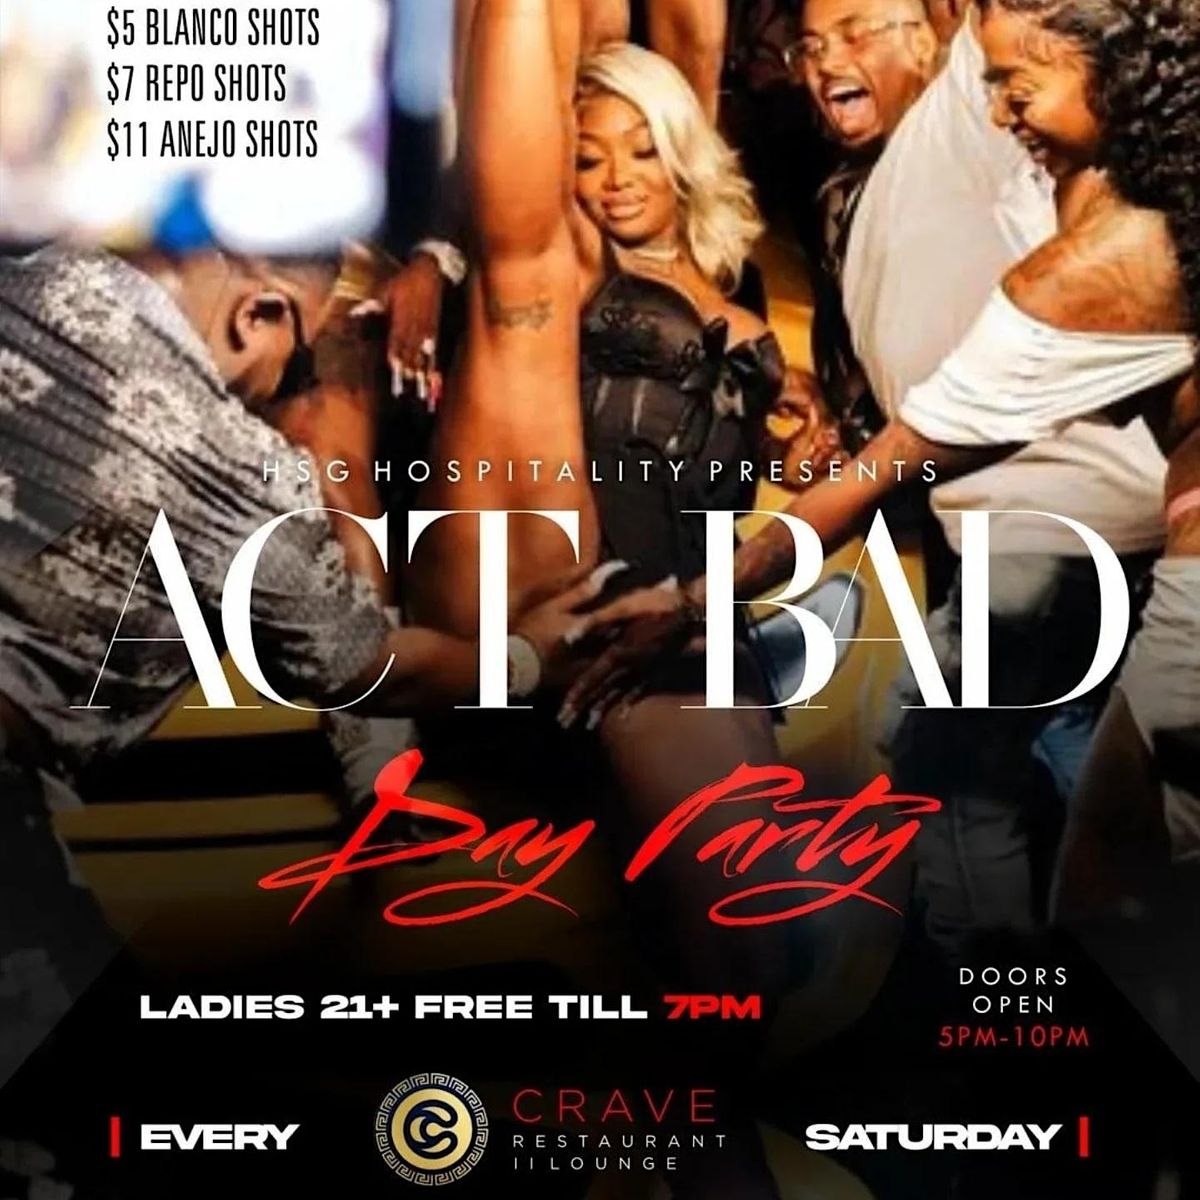 ACT BAD DAY PARTY